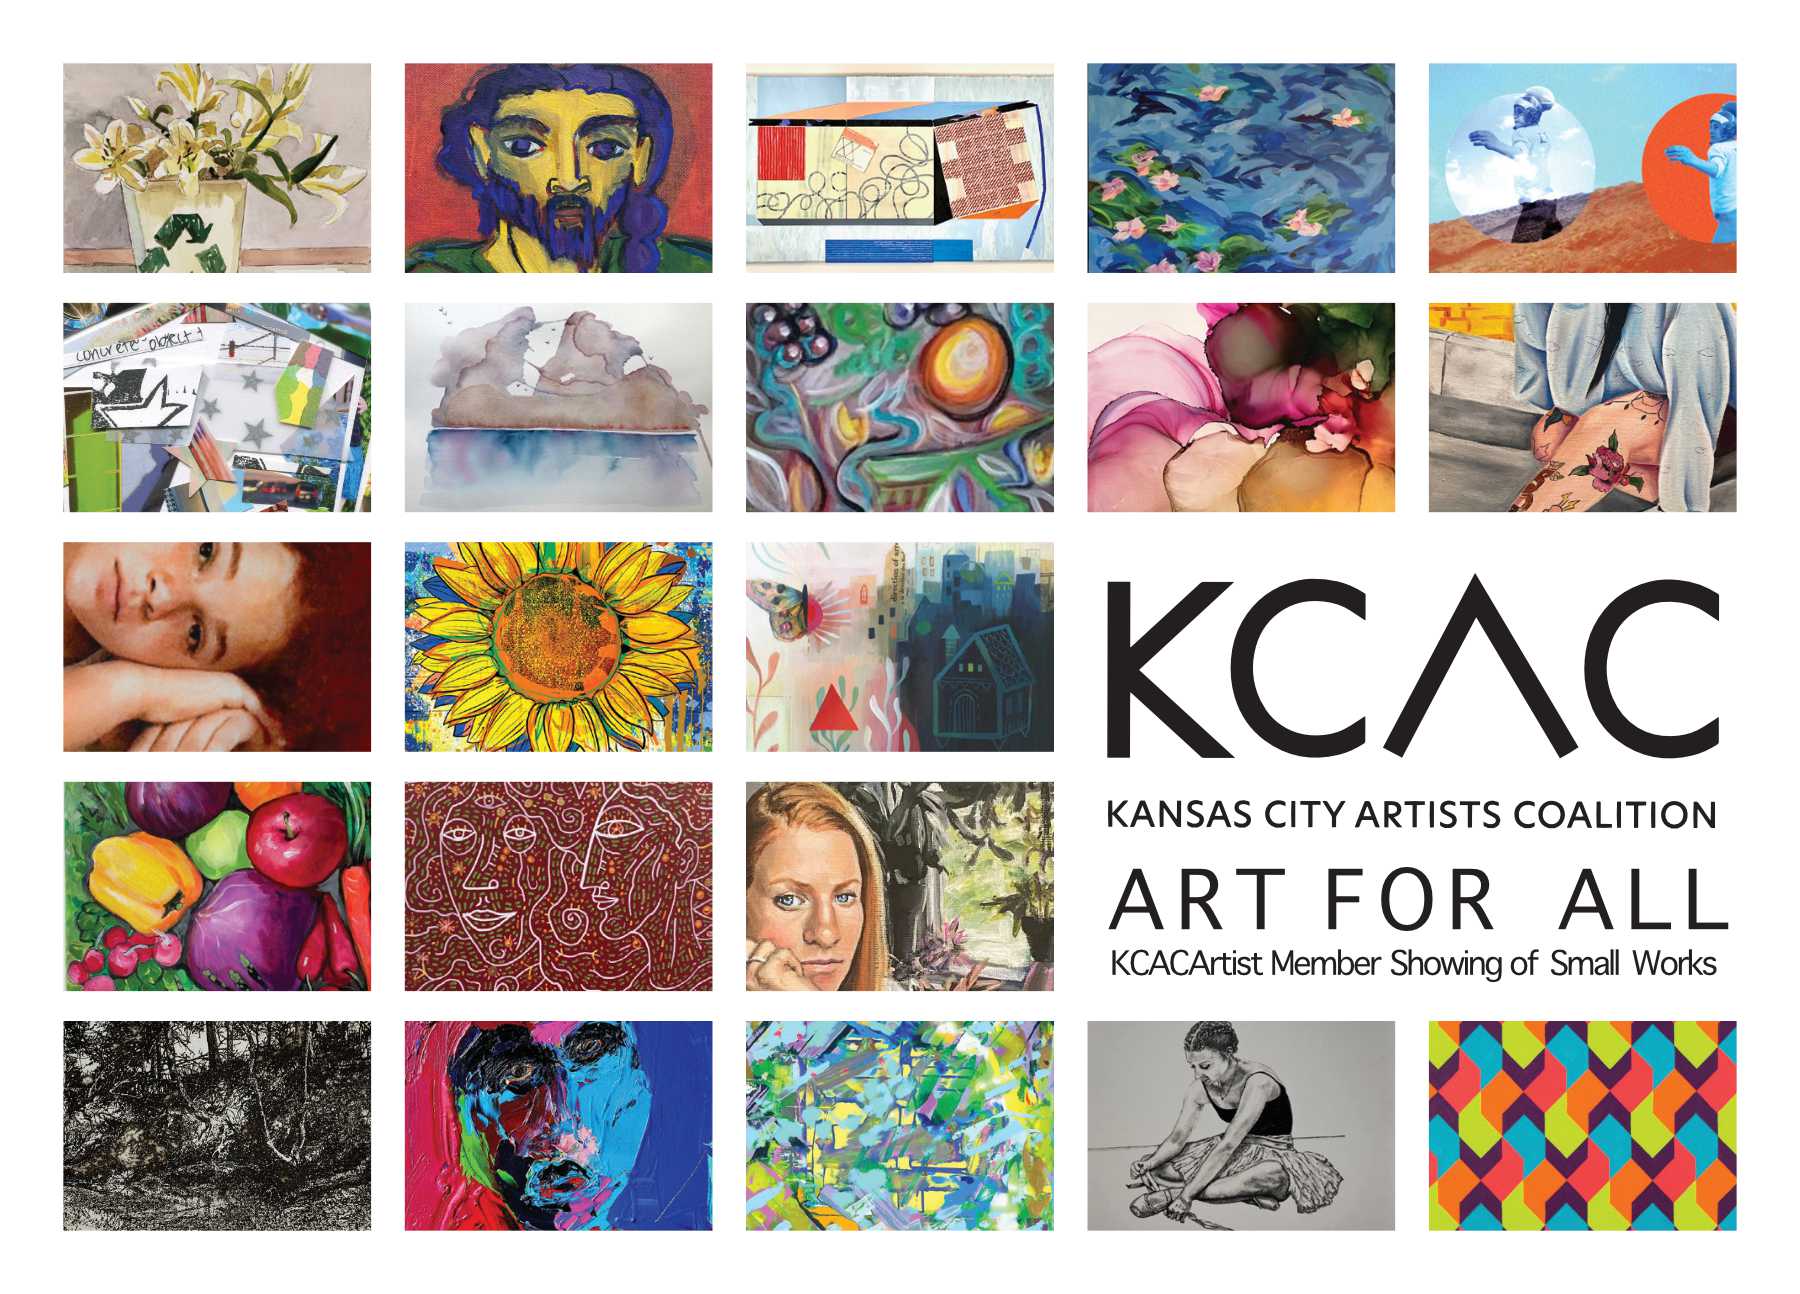 Art for All at KCAC